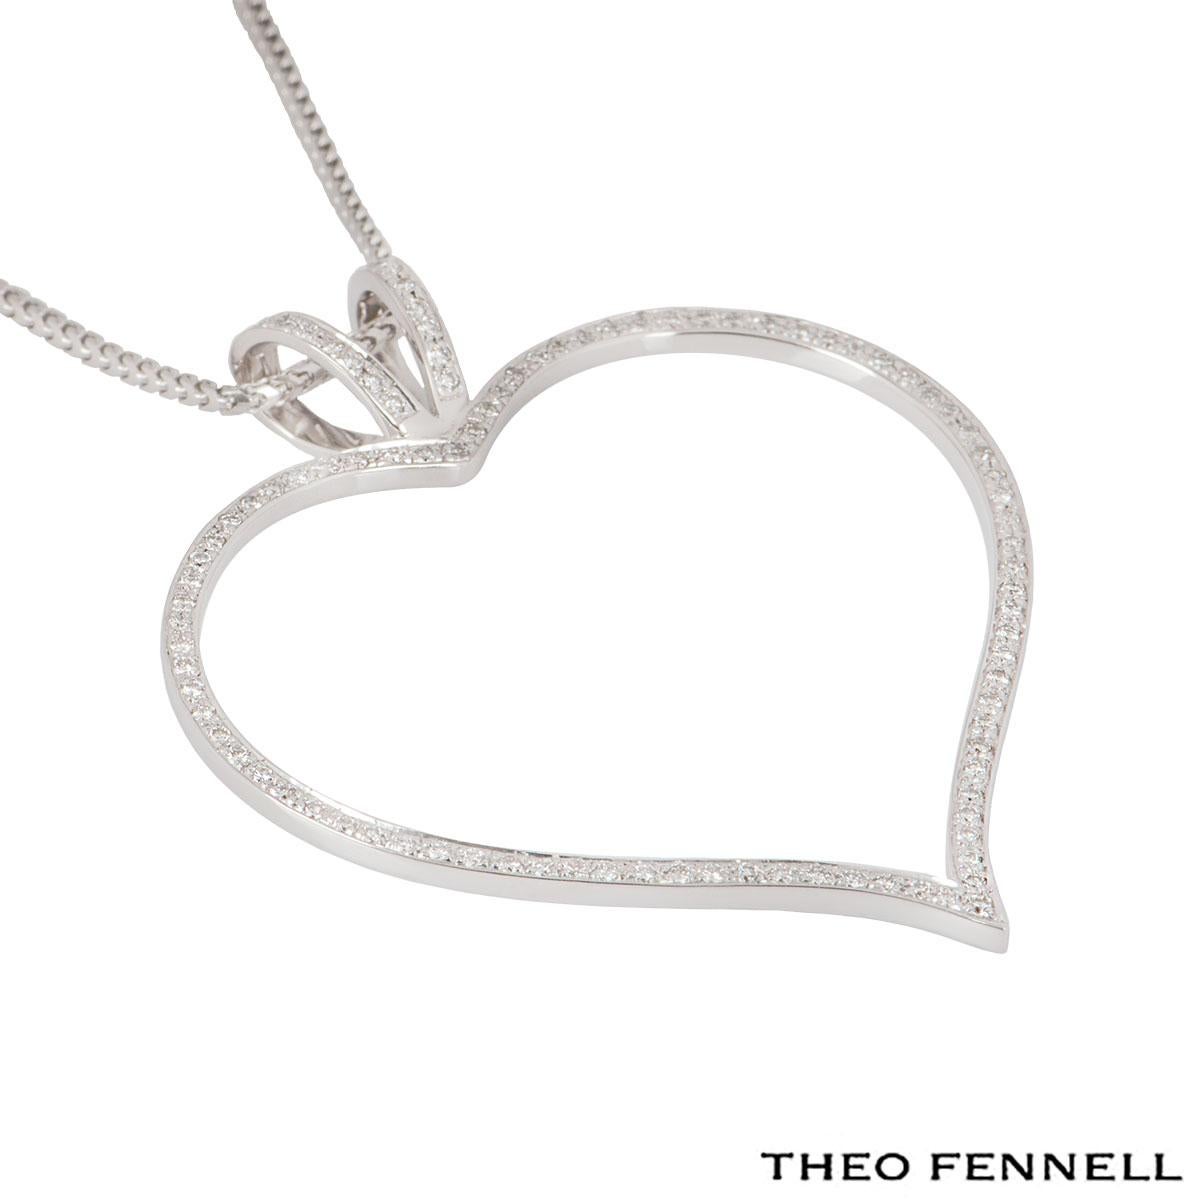 An 18k white gold diamond heart necklace by Theo Fennell. The necklace features an openwork heart motif set with approximately 128 round brilliant cut diamonds in a pave setting with an approximate weight of 0.85ct. The chain (not by Theo Fennell)